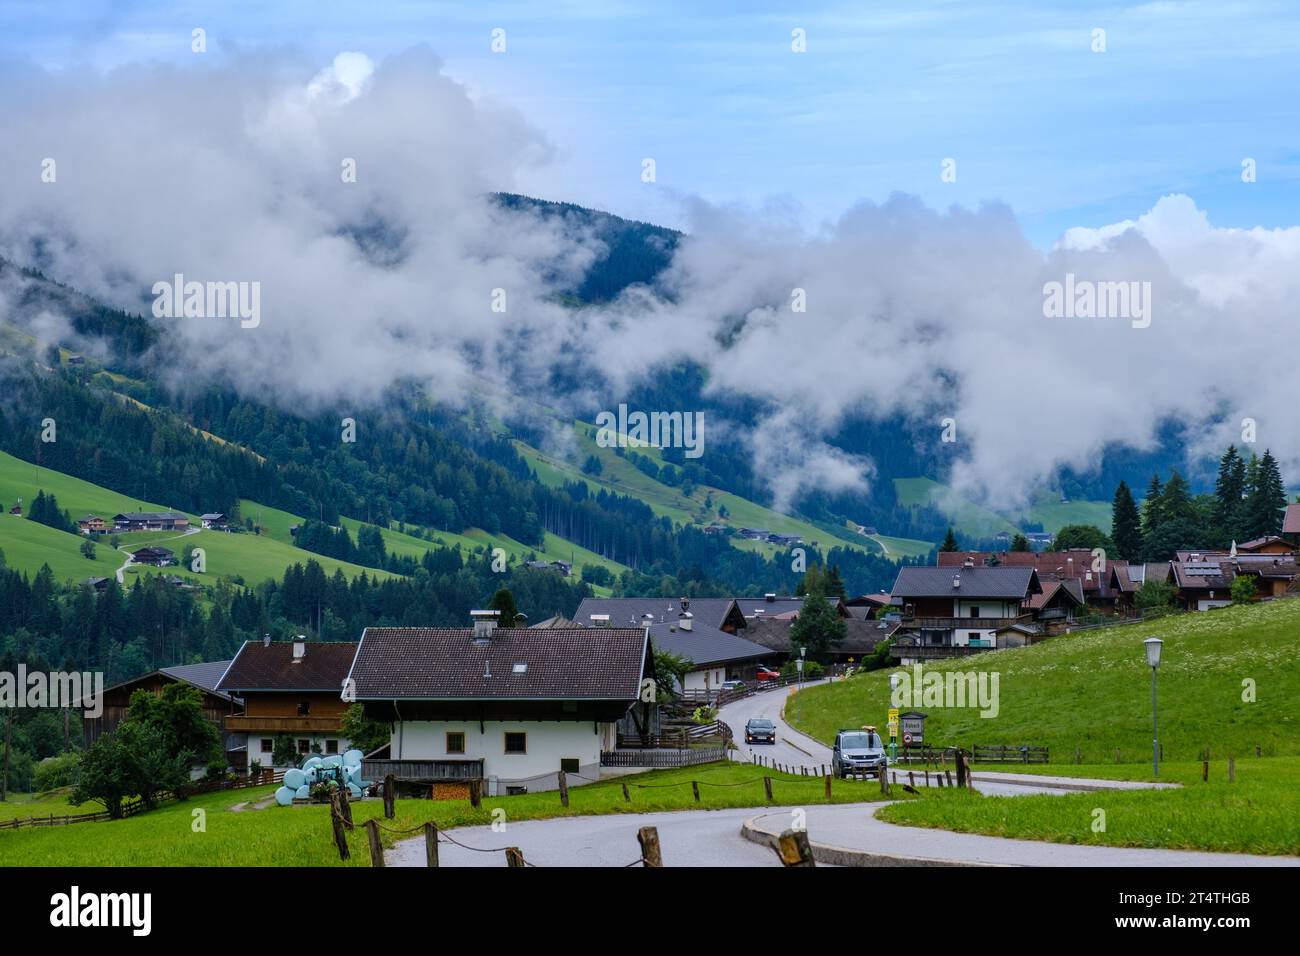 Village of Alpbach in Austrian Alps with traditional wooden houses, steep hills with meadows, tall trees & thick low clouds. Stock Photo